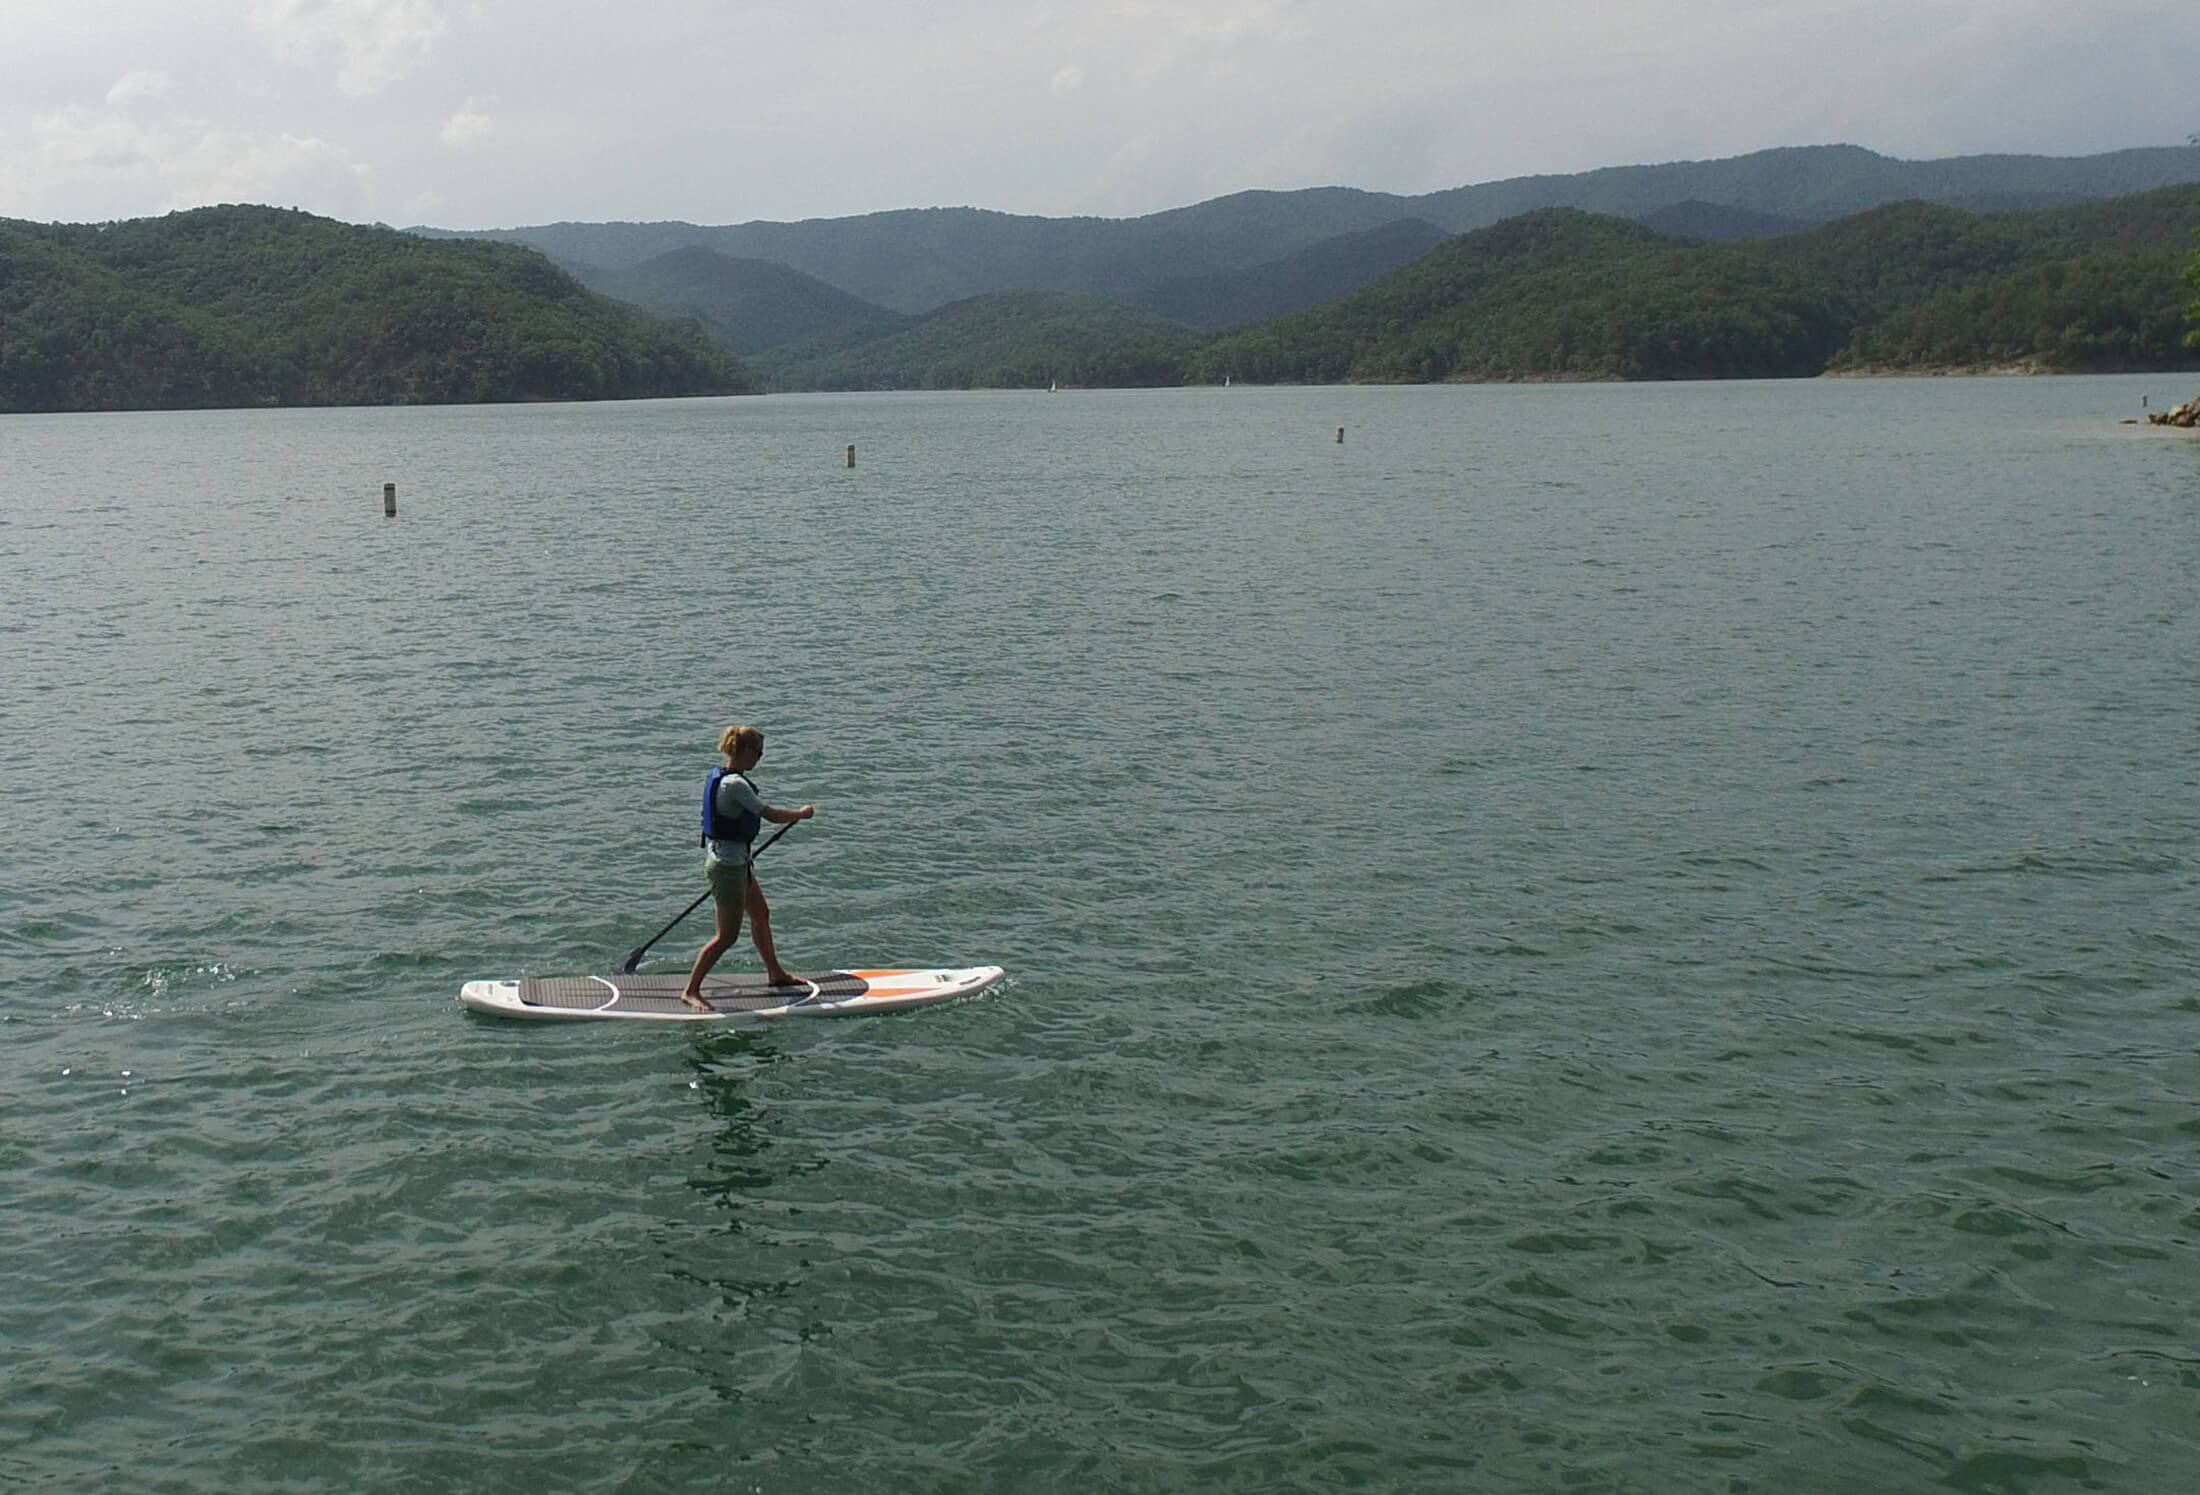 Stand-Up Paddle Boarding